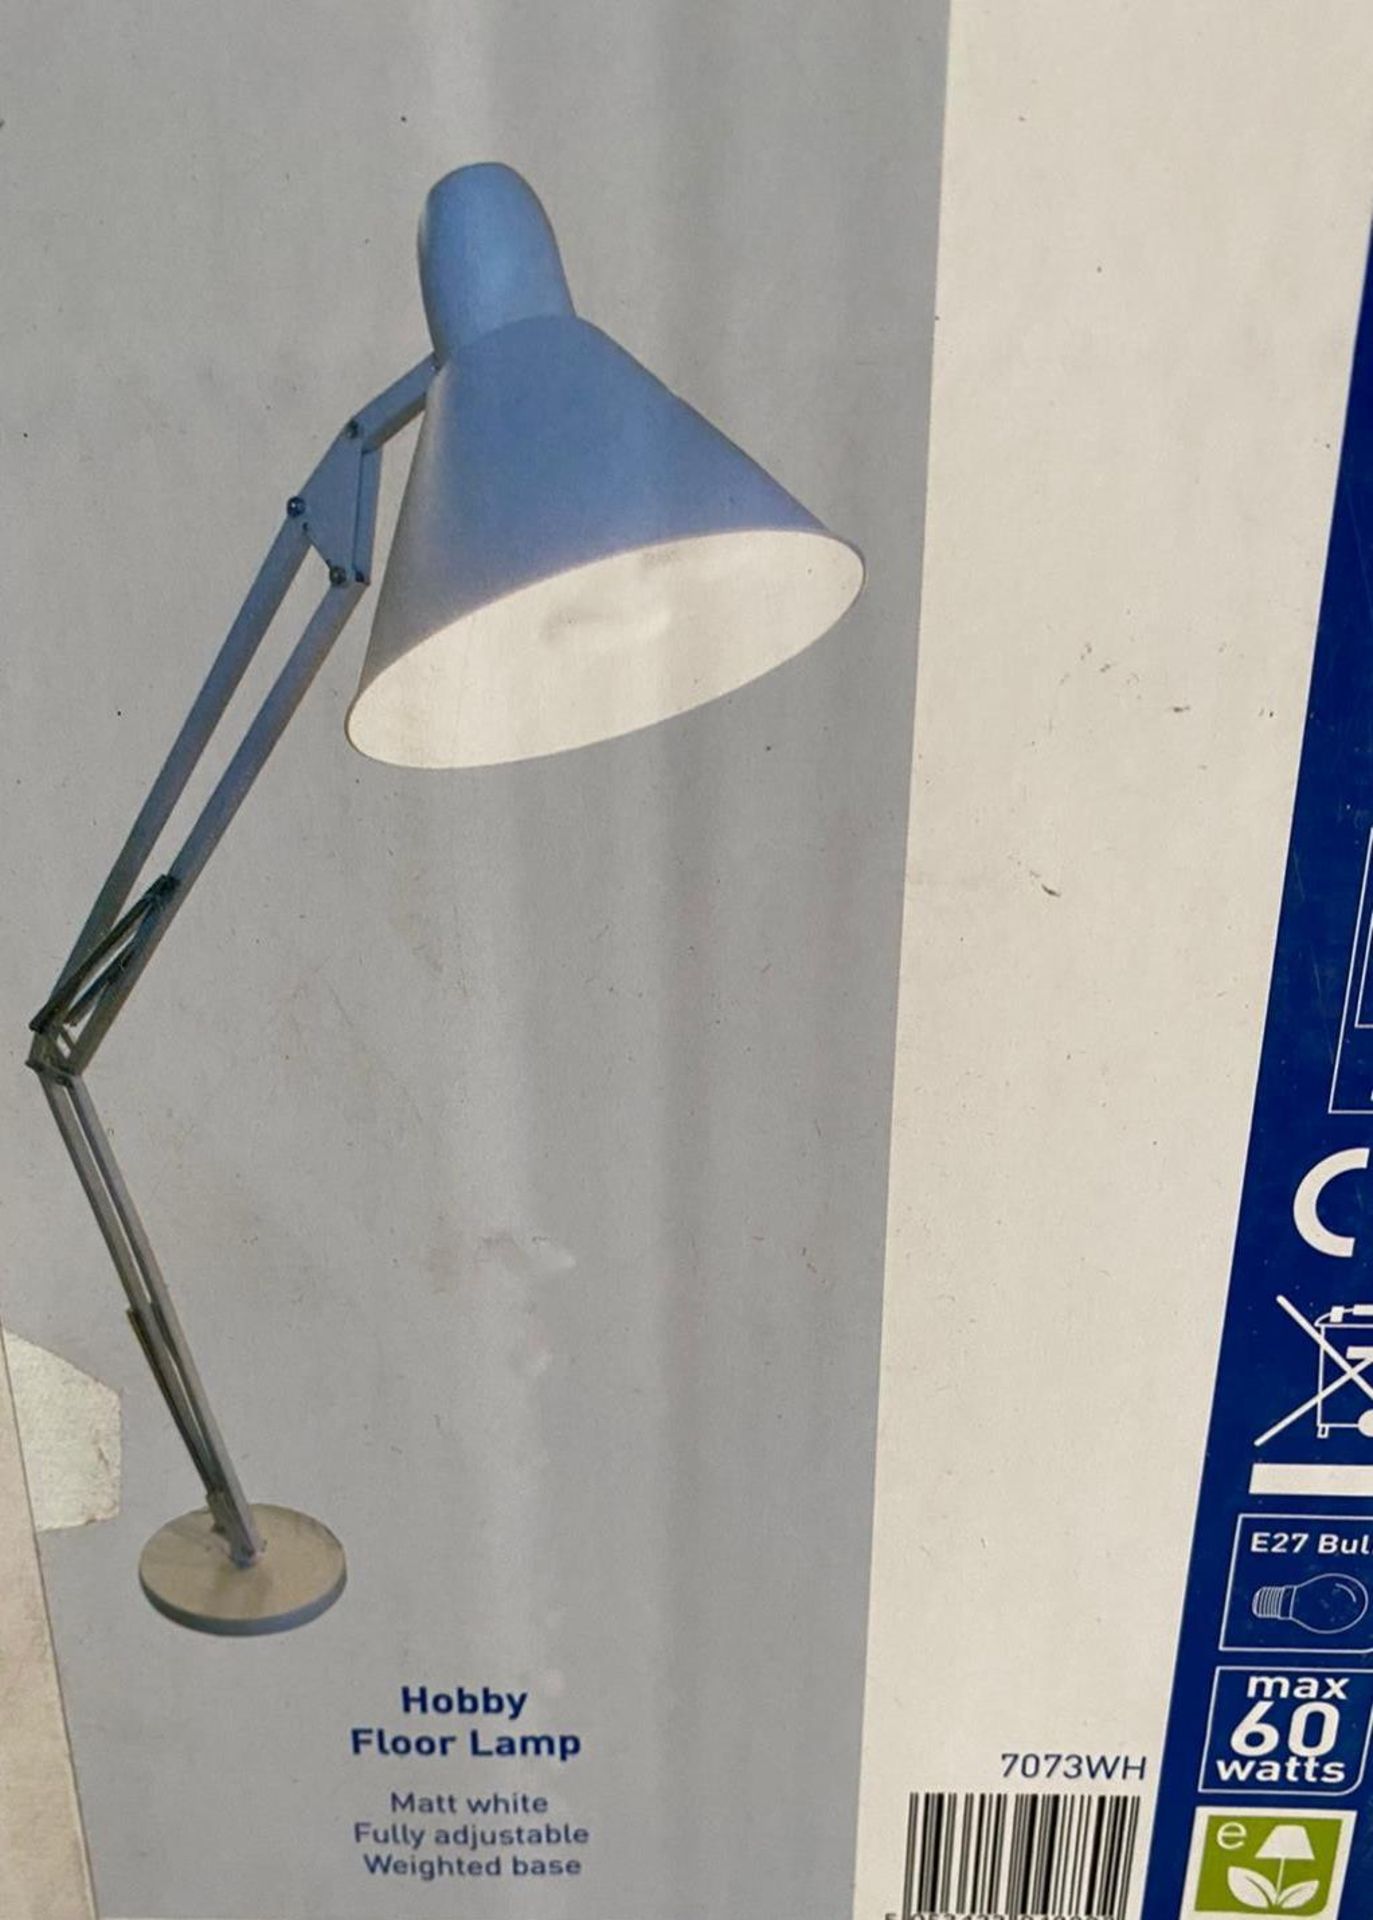 1 x Searchlight Hobby Floor Lamp in matt white- Ref: 7073WH - New and Boxed - RRP: £180